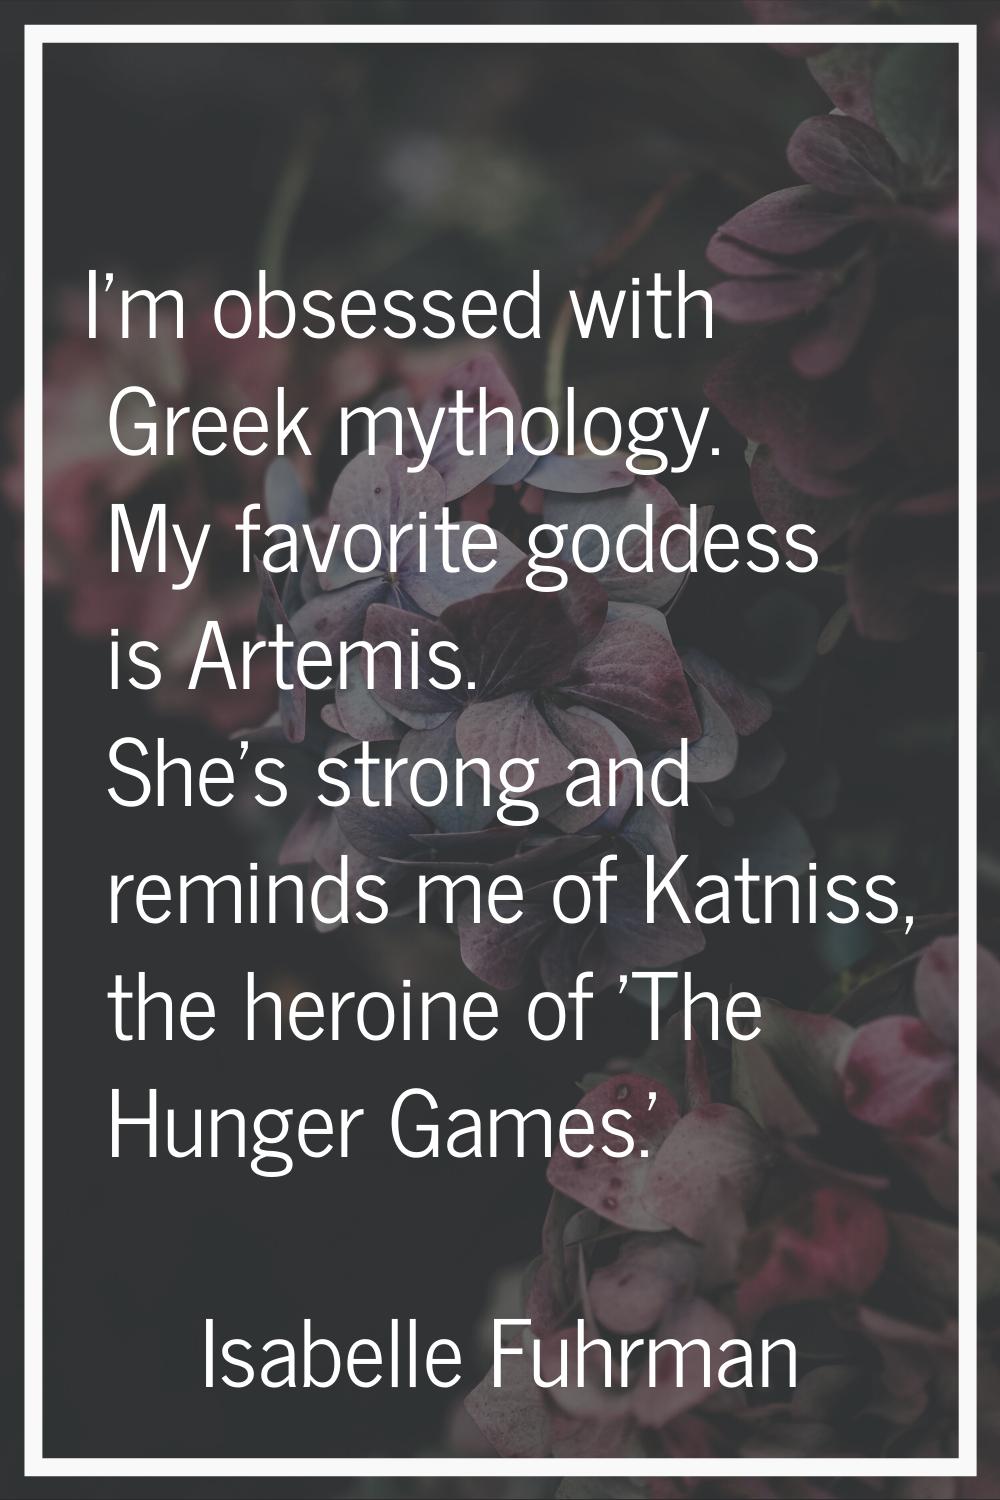 I'm obsessed with Greek mythology. My favorite goddess is Artemis. She's strong and reminds me of K